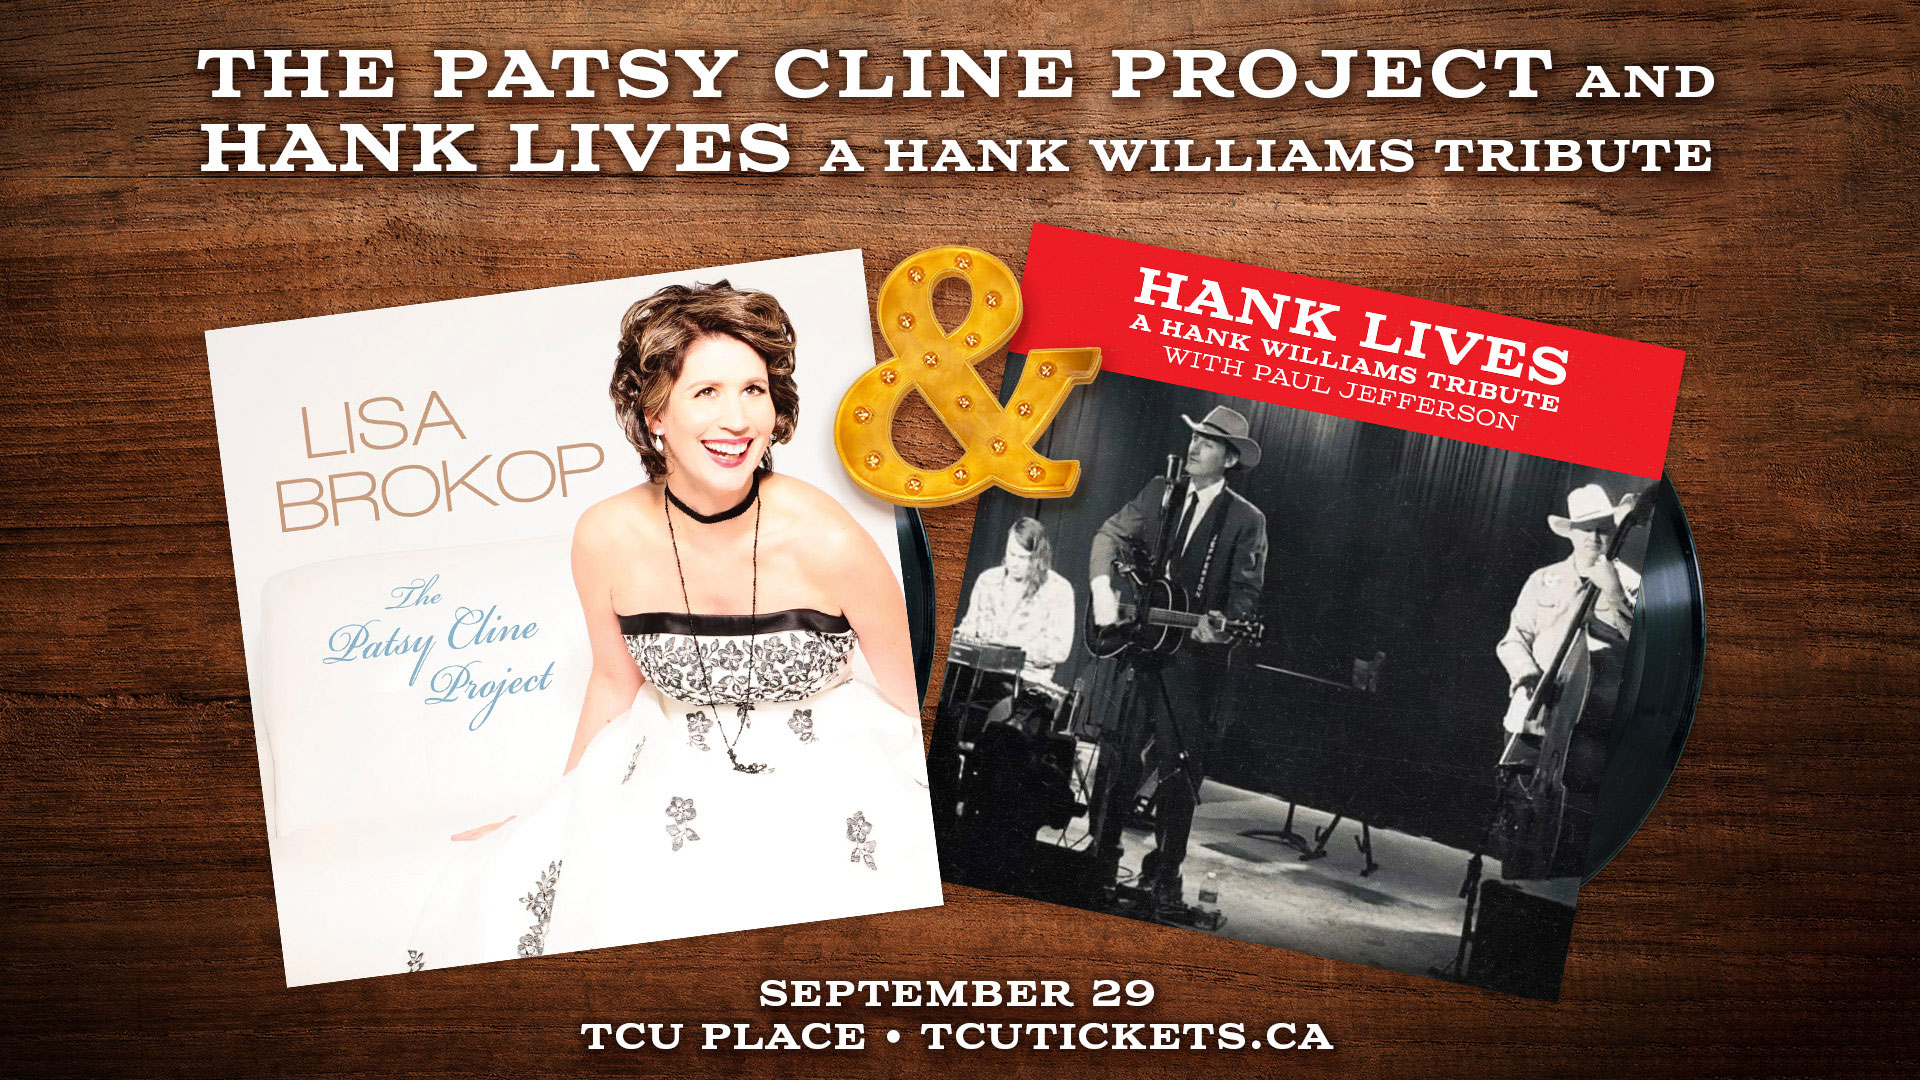 Lisa Brokop Presents: The Patsy Cline Project and Hank Lives, featuring Paul Jefferson - September 29th at TCU Place